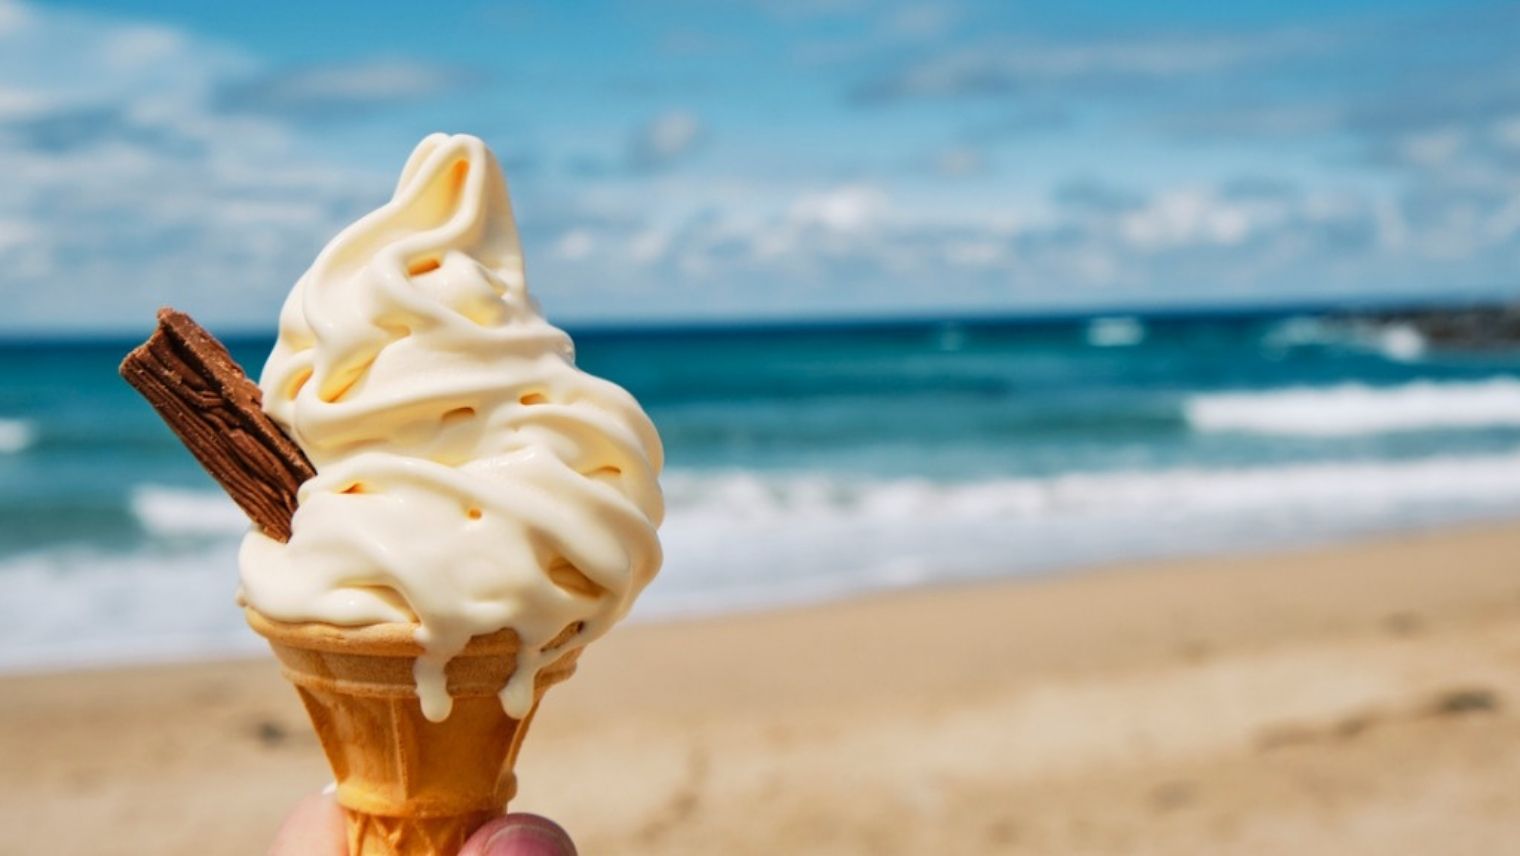 Ice cream at the seaside - visit Weymouth in Dorset with South Western Railway